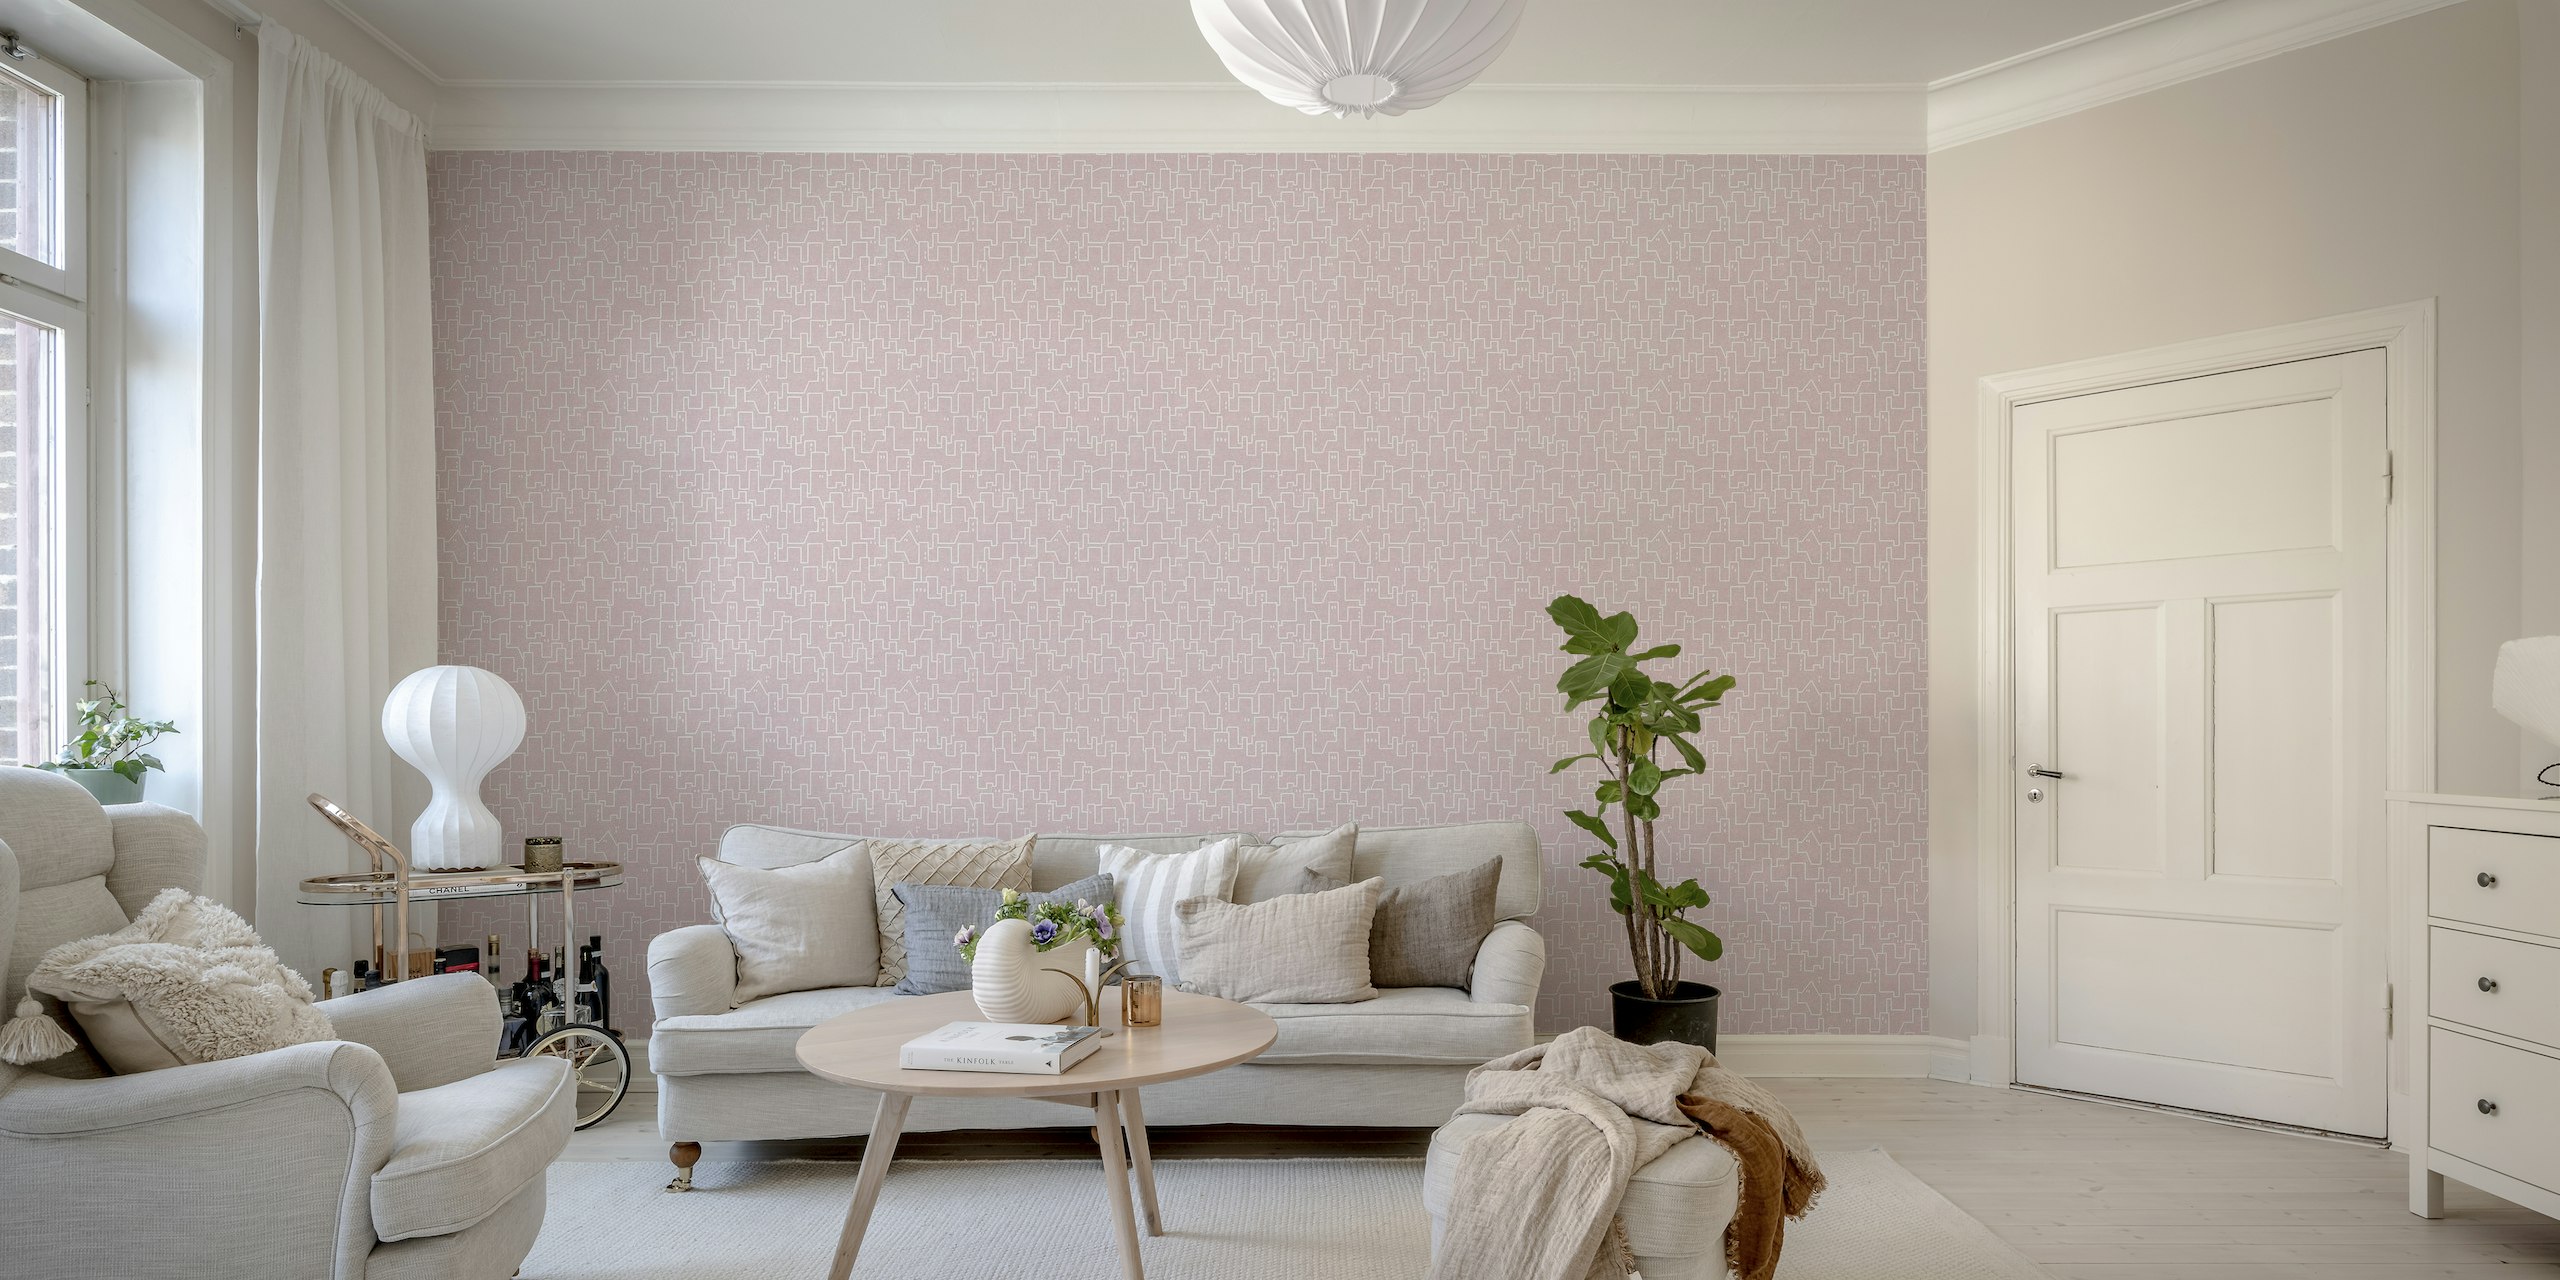 Abstract city skyline wall mural in soft pink tones